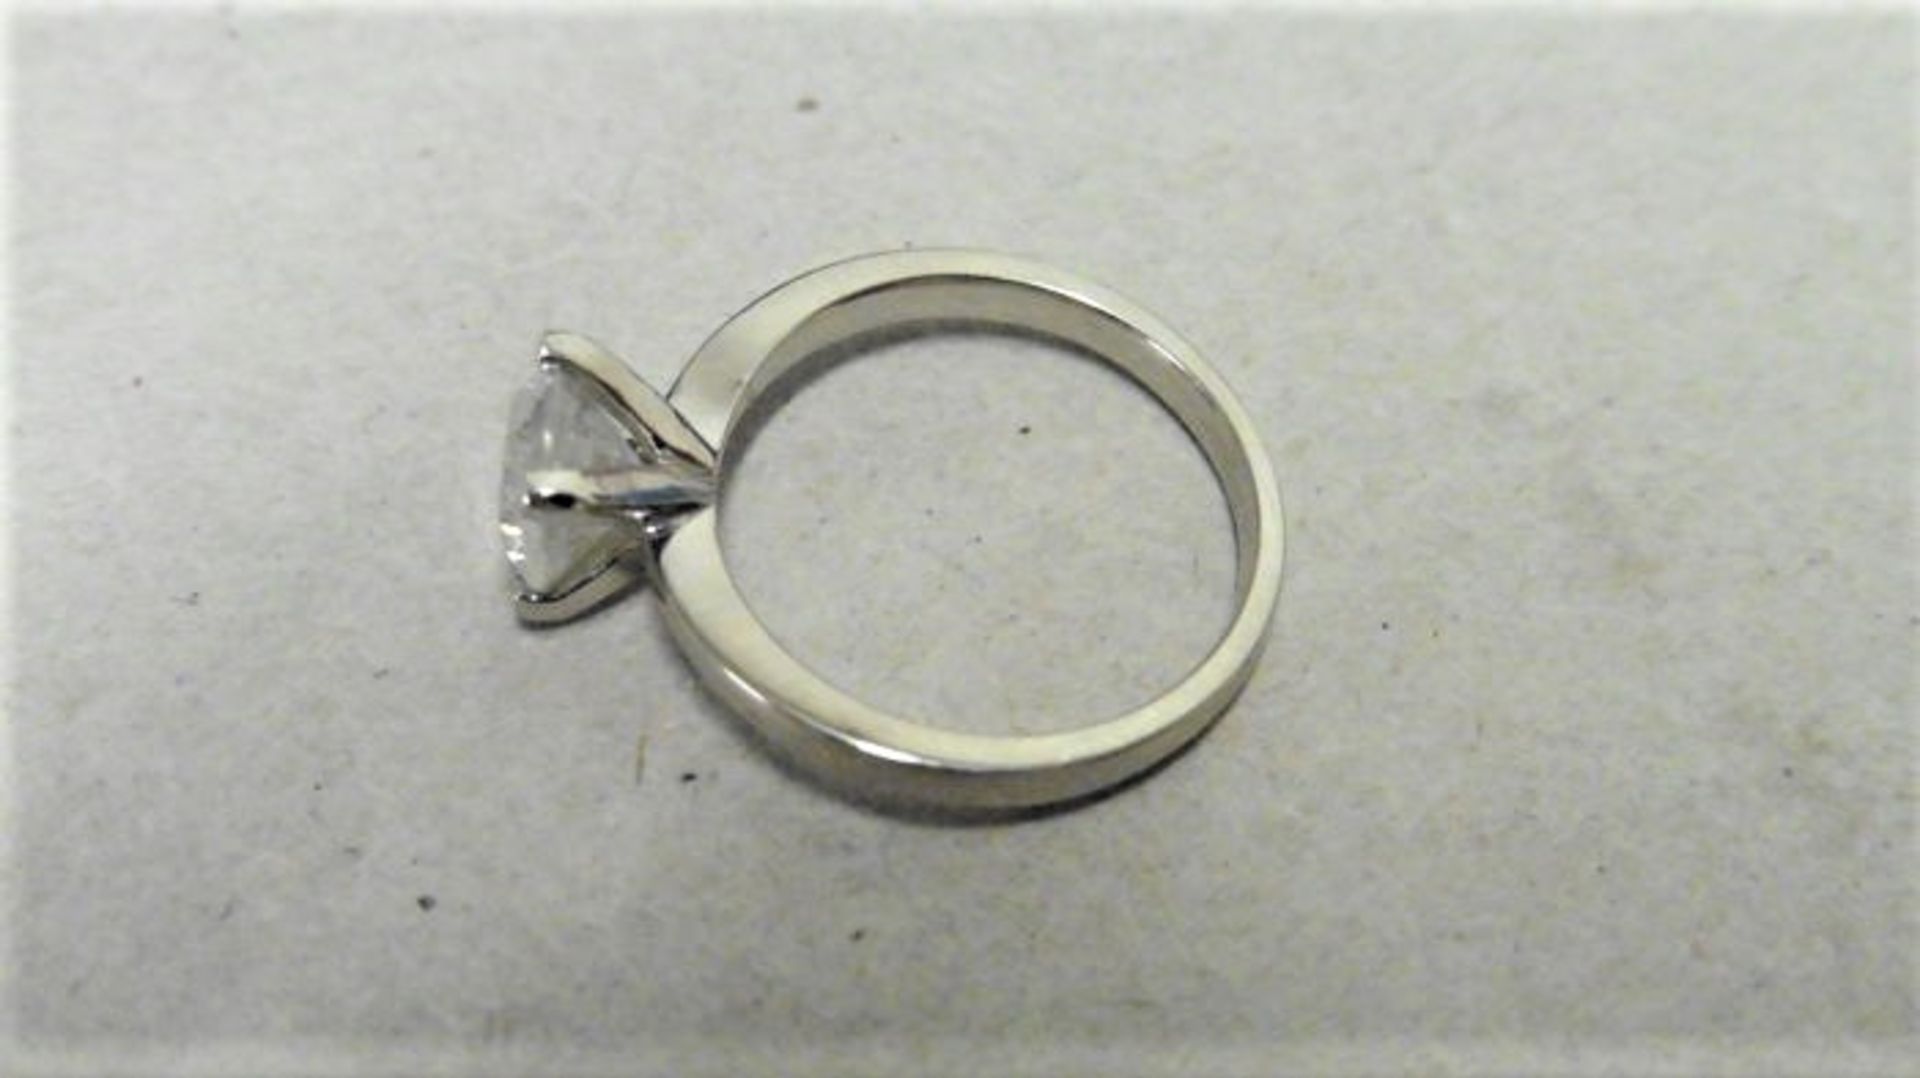 1.72ct diamond solitaire ring set in 18ct white gold. I colour and I2 clarity. 4 claw setting. - Image 3 of 3